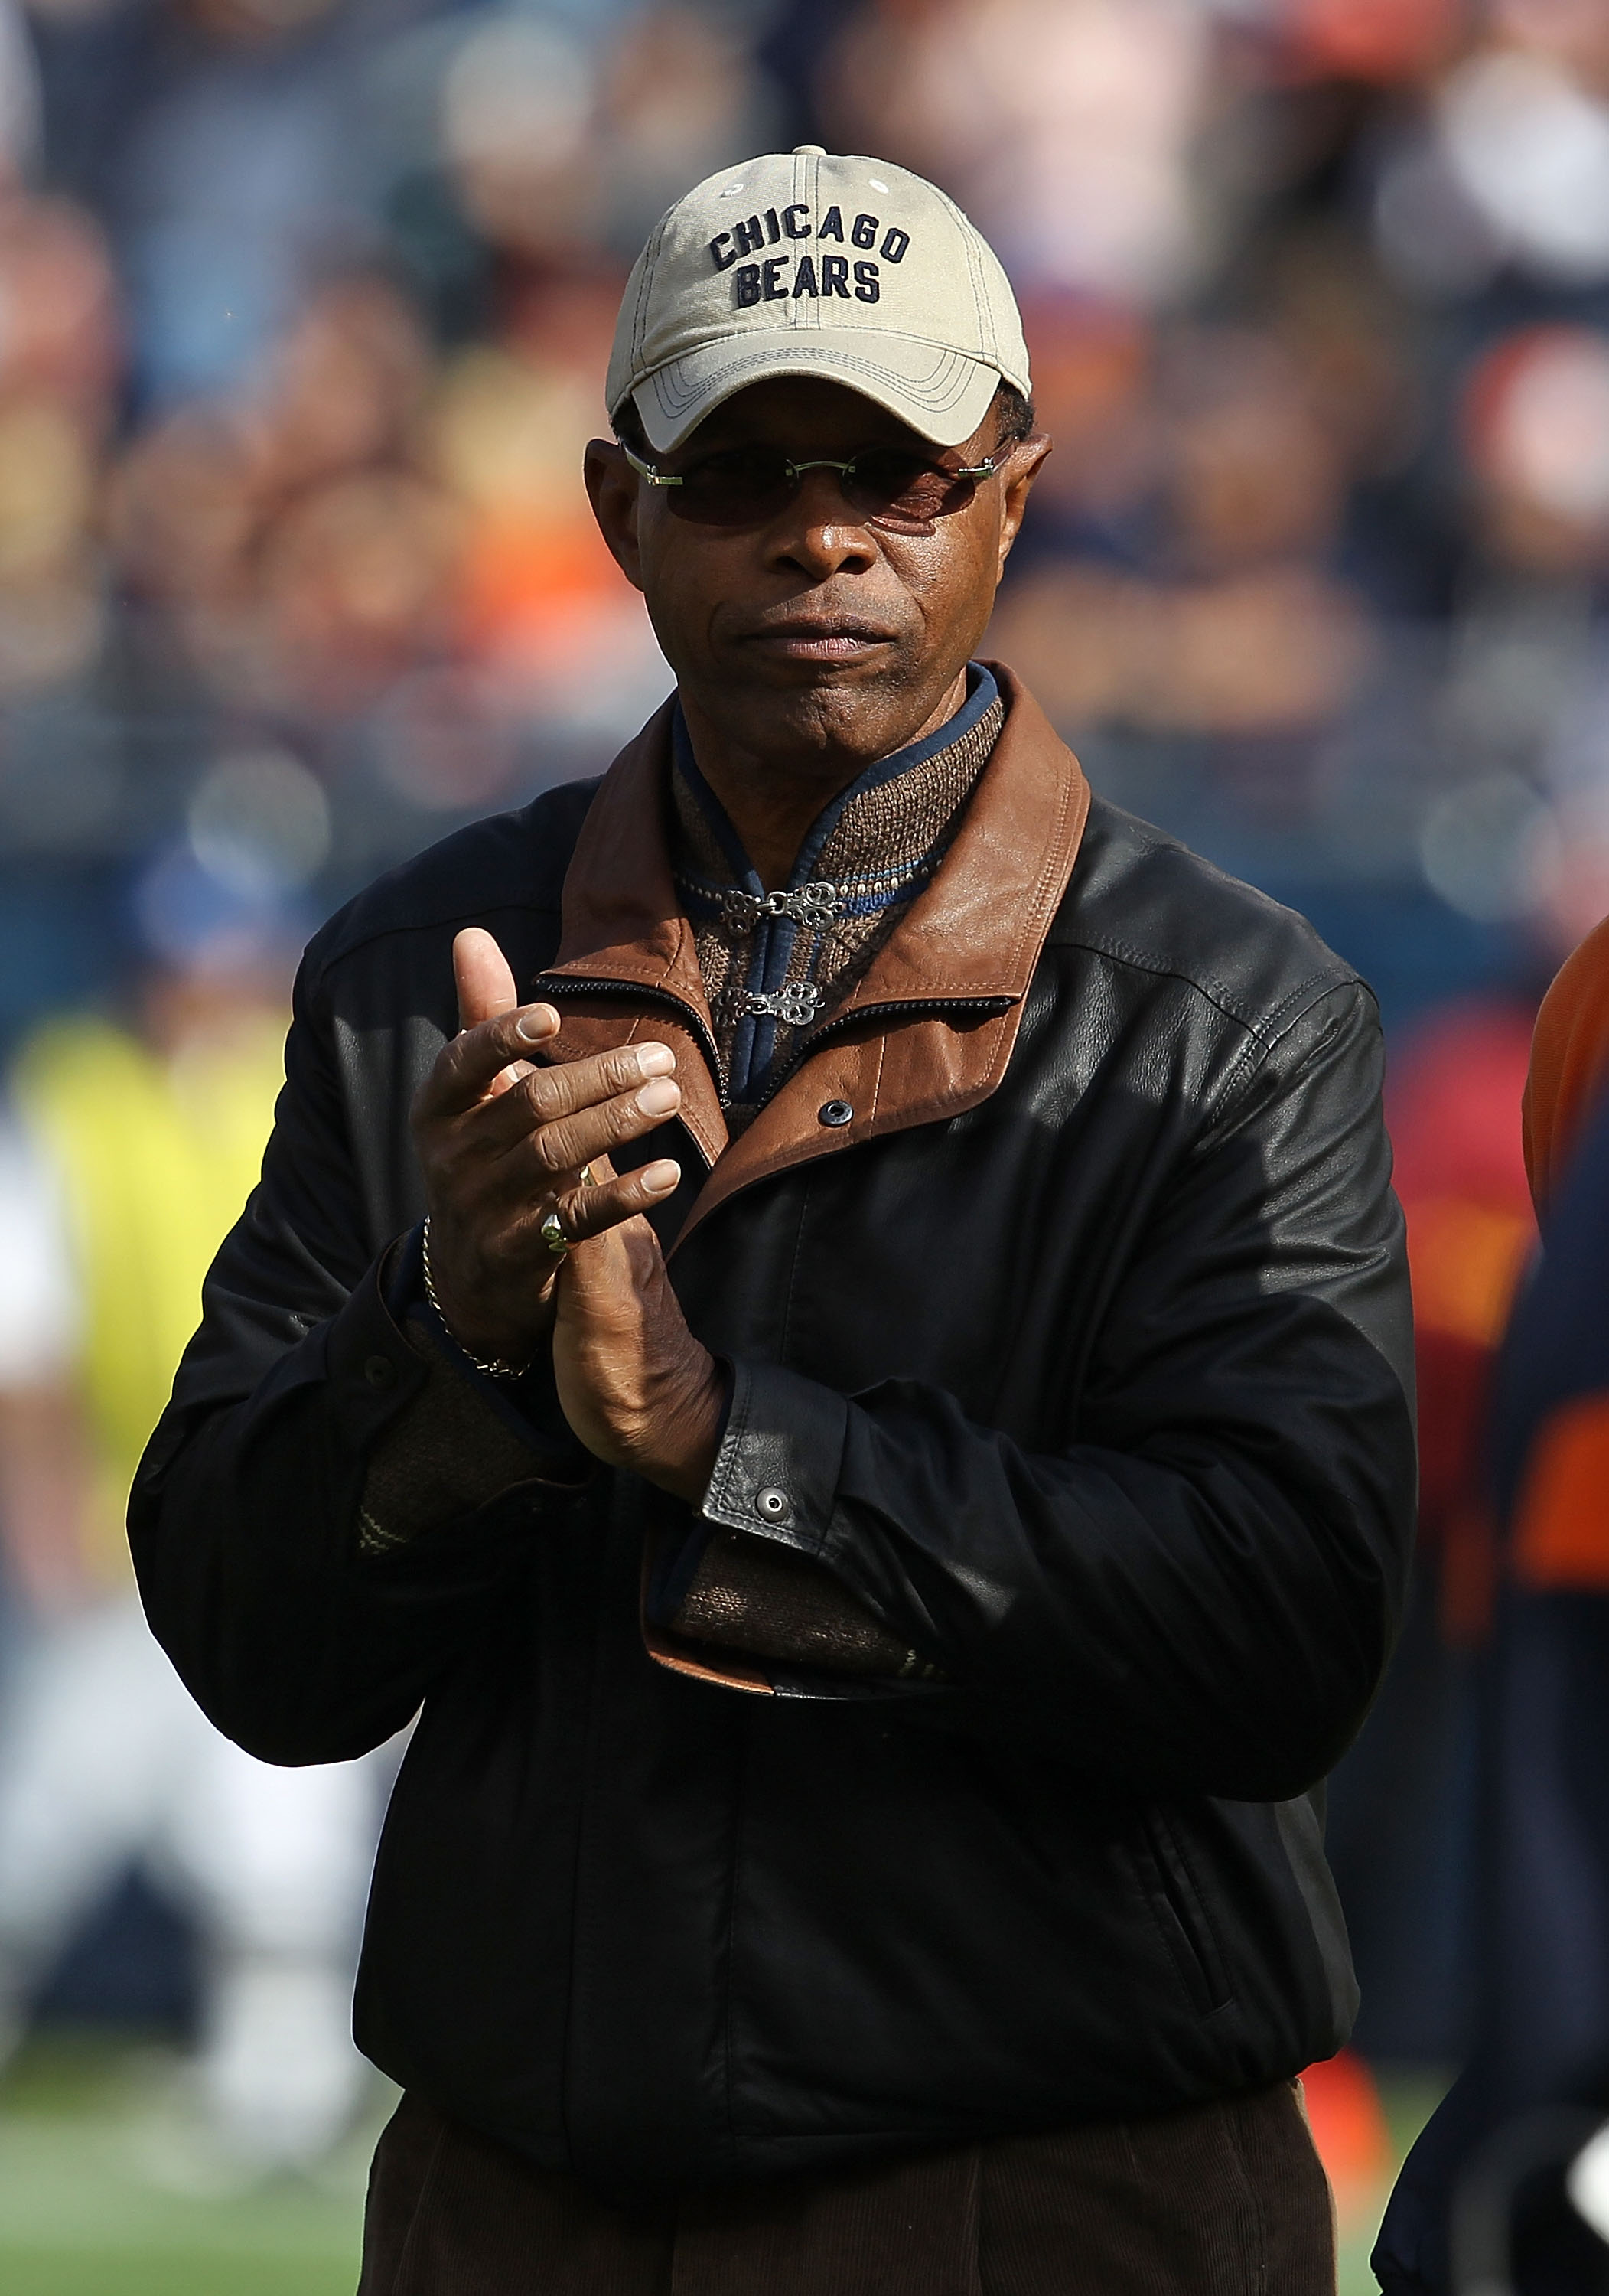 CHICAGO - OCTOBER 24: Former player Gayle Sayers of the Chicago Bears is introducted to the crowd before a game against the Washington Redskins at Soldier Field on October 24, 2010 in Chicago, Illinois. (Photo by Jonathan Daniel/Getty Images)